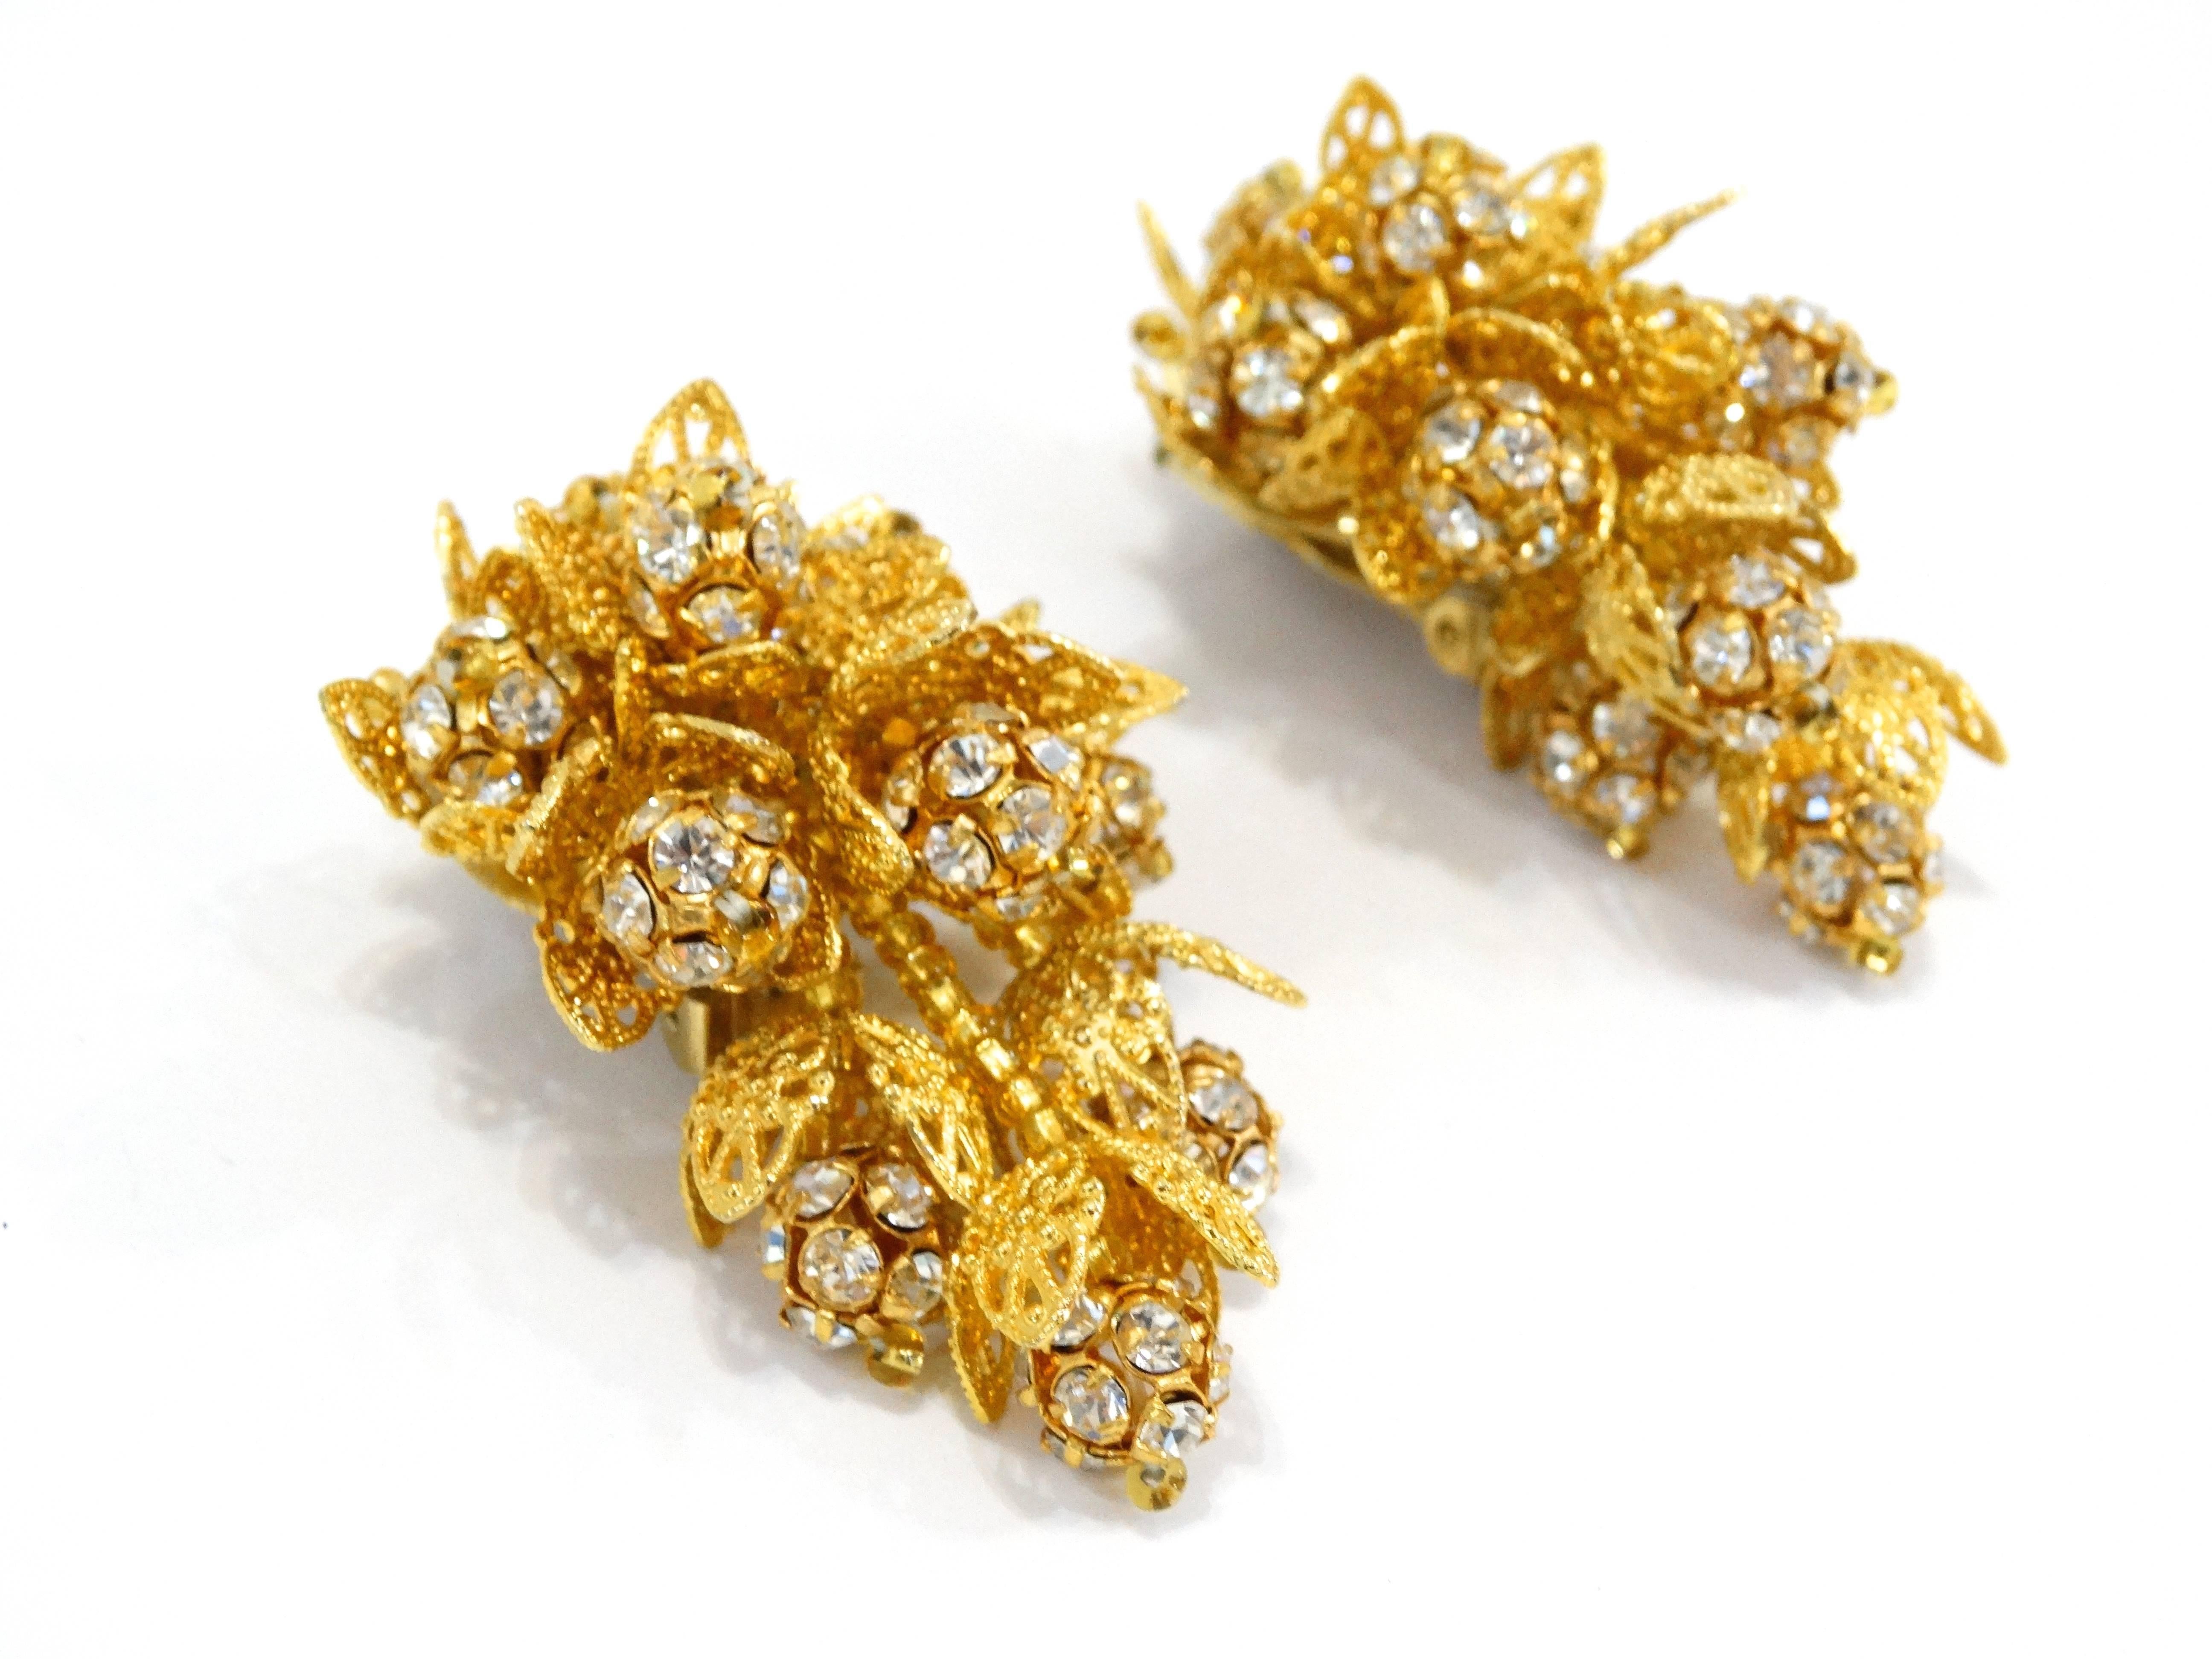 Incredible vintage Lois Ann cluster earrings! A bouquet of crystalline rhinestones with gold leaflike accents. Clip on backs. Signed Lois Ann on the back. 

Length: 2”
Width: 1”